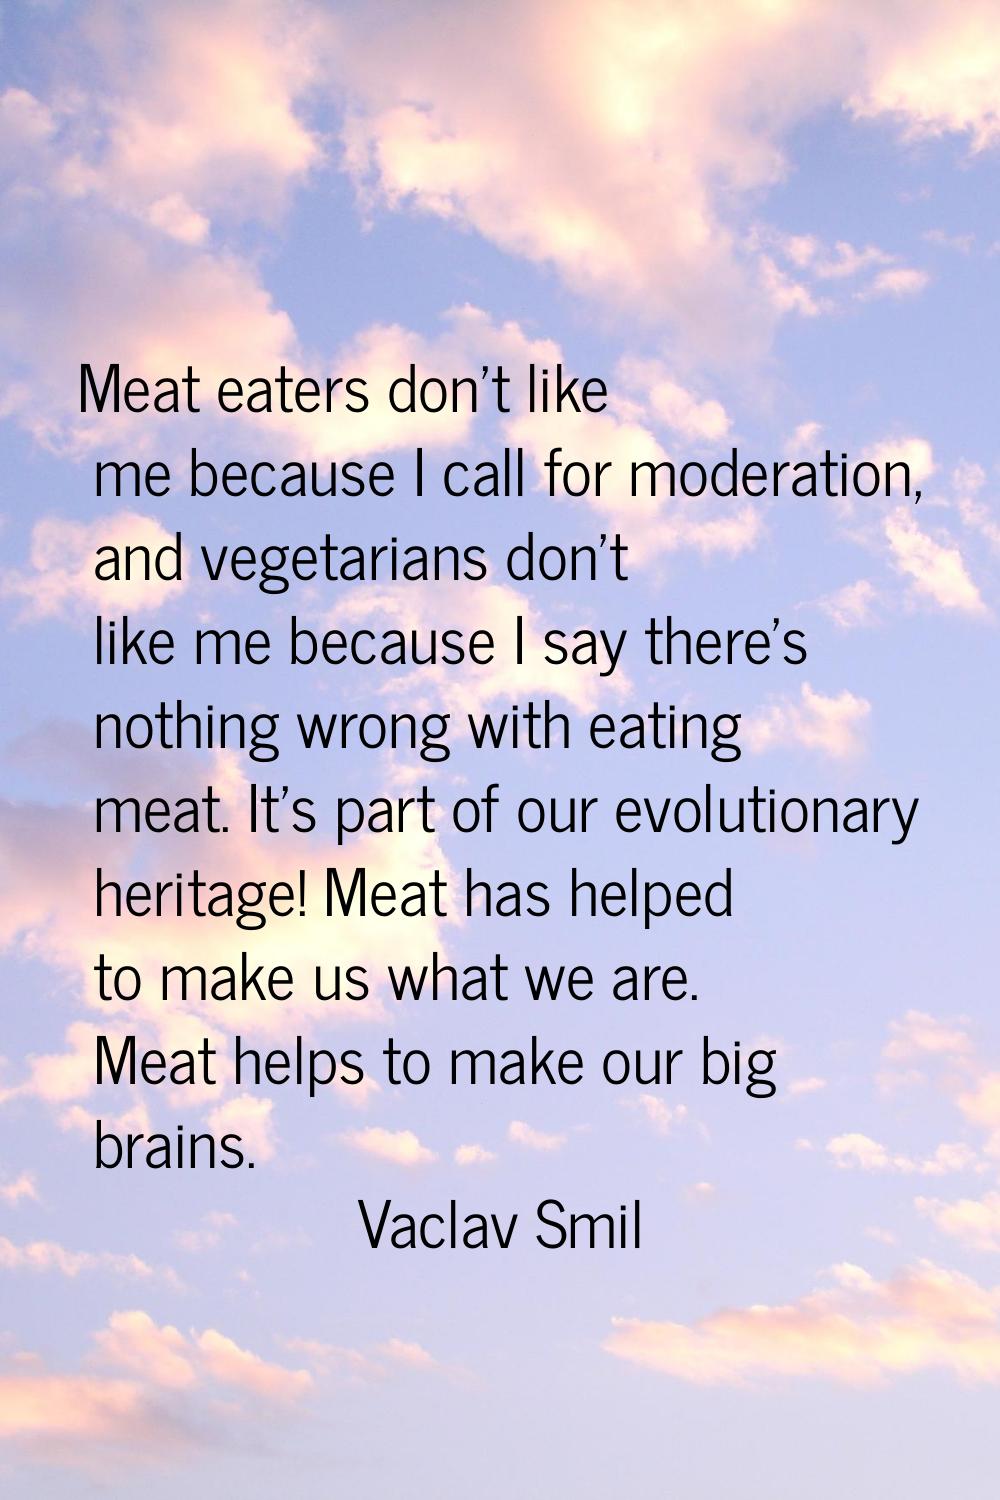 Meat eaters don't like me because I call for moderation, and vegetarians don't like me because I sa